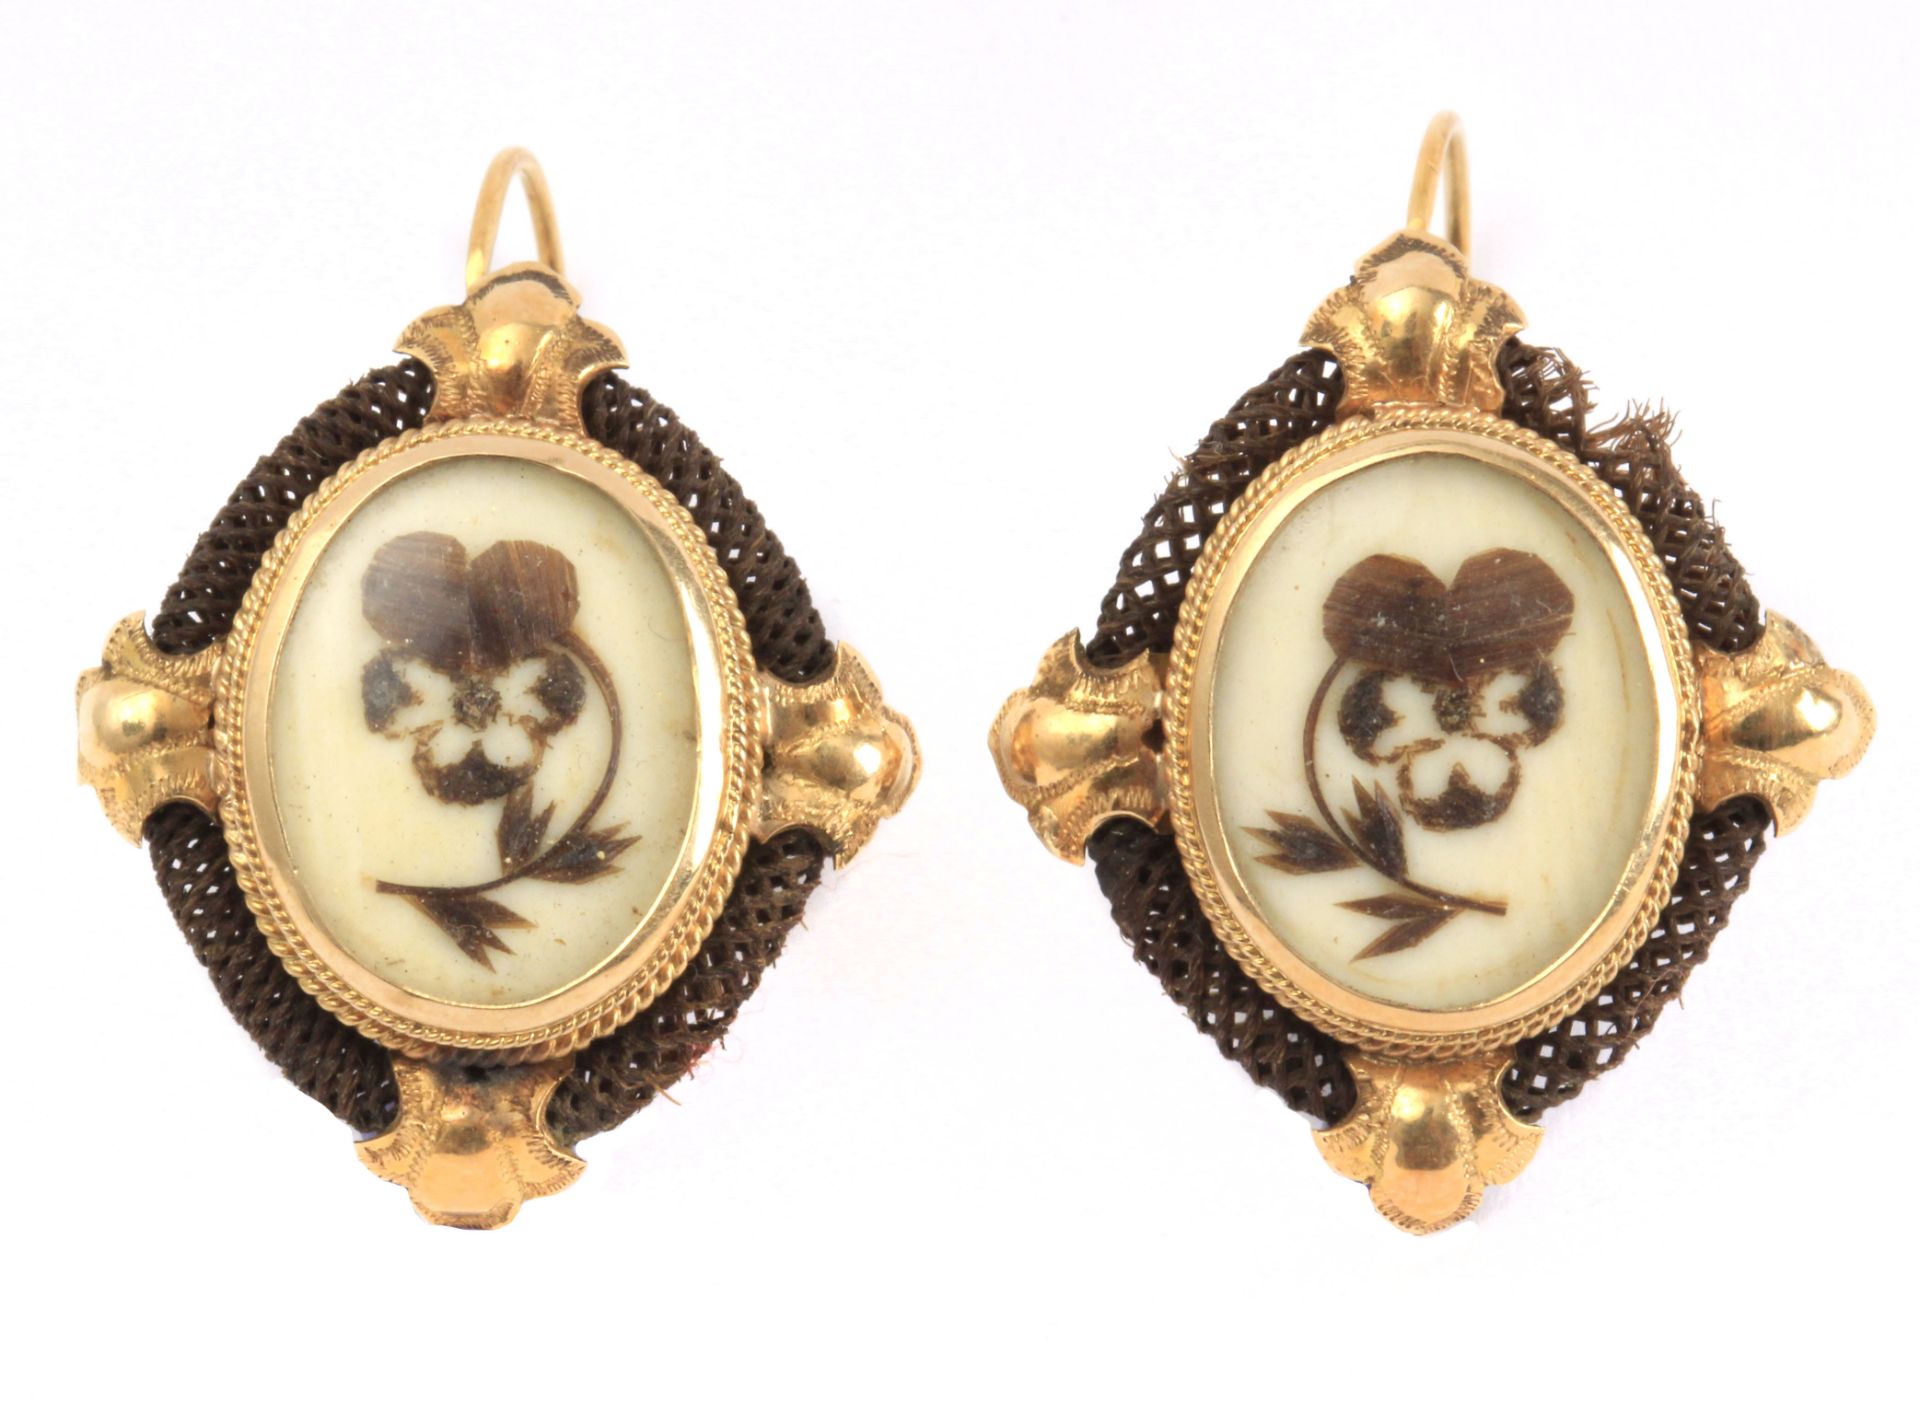 A pair of 19th century mourning earrings